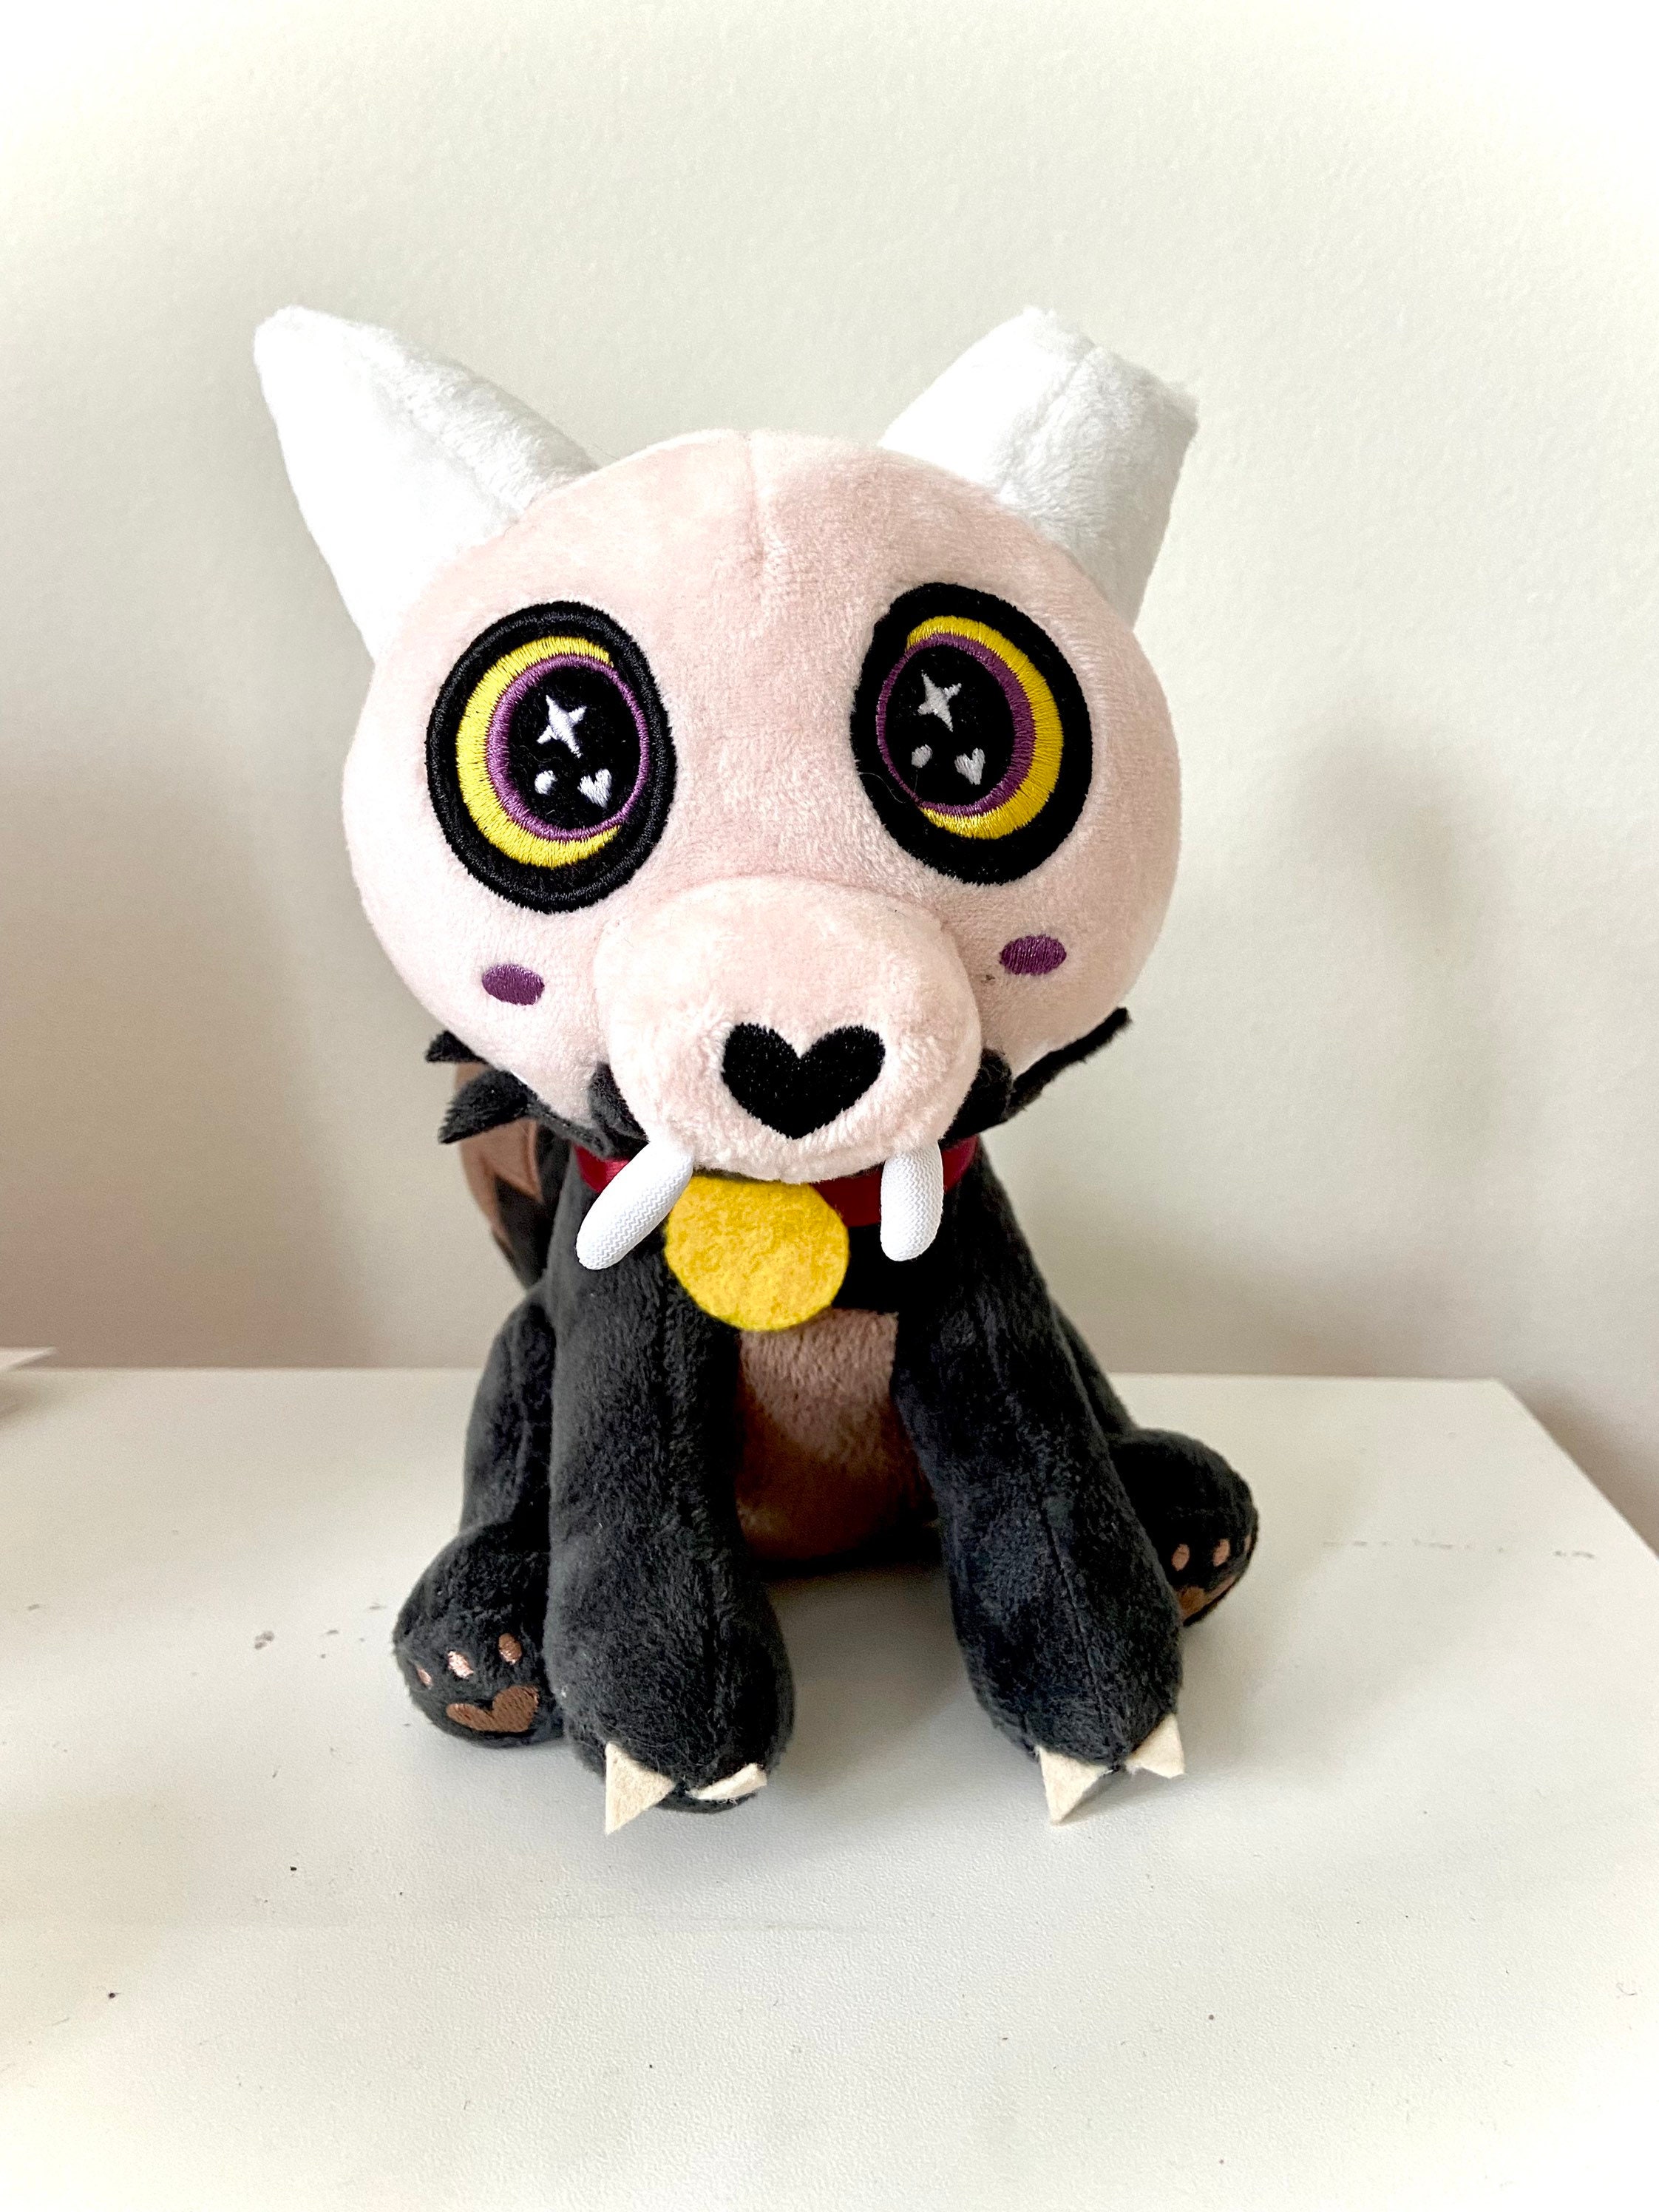 THE OWL HOUSE Baby King Plush Available In Multiple Colors And